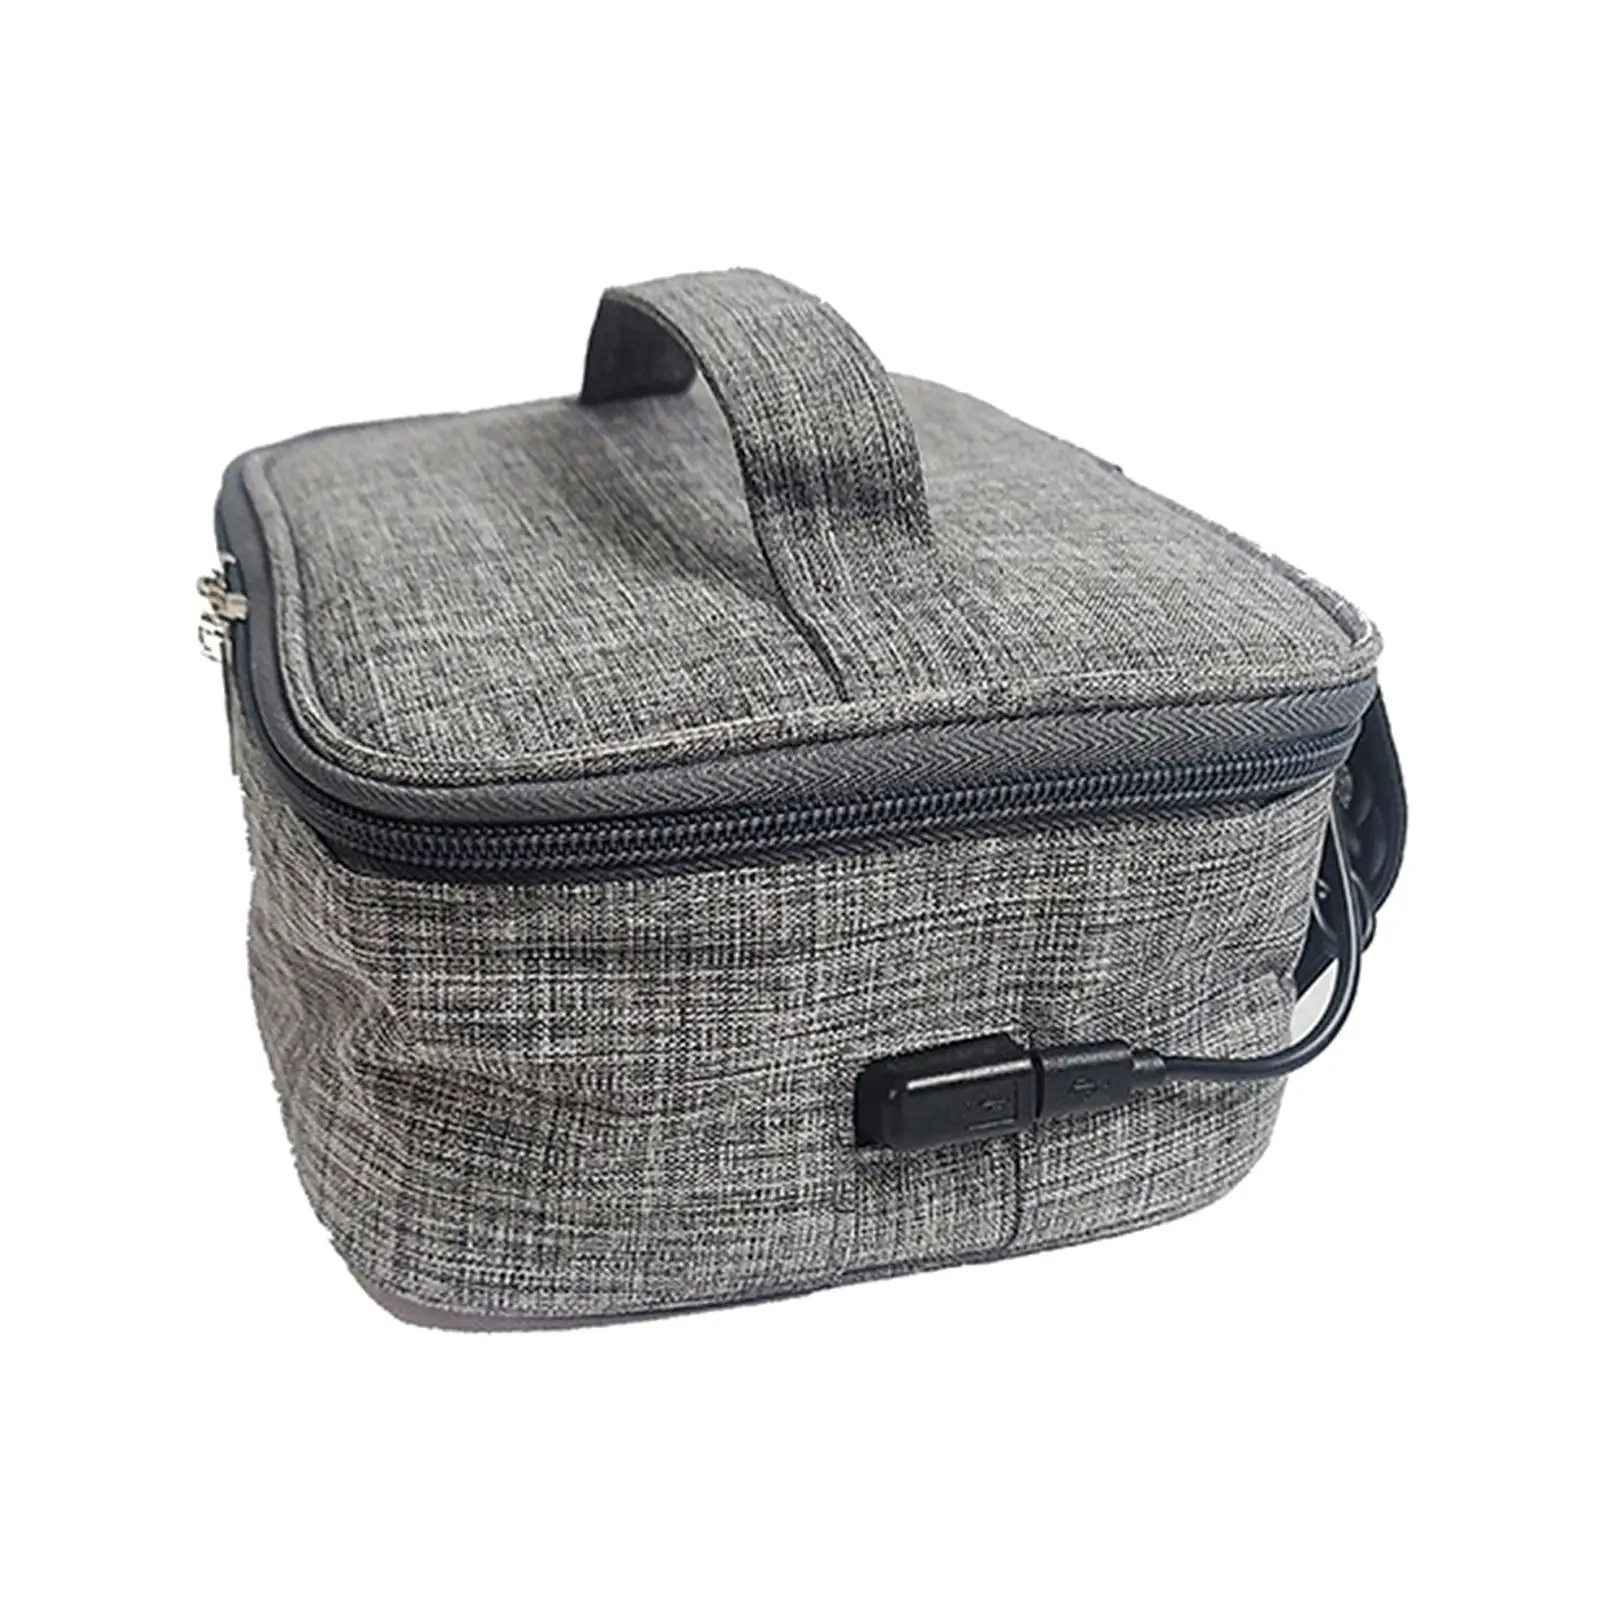 USB Heated Lunch Boxes Bag Container Oxford Cloth for Office Food Warmer Lunch Heater Tote Personal Microwave Durable Convenient